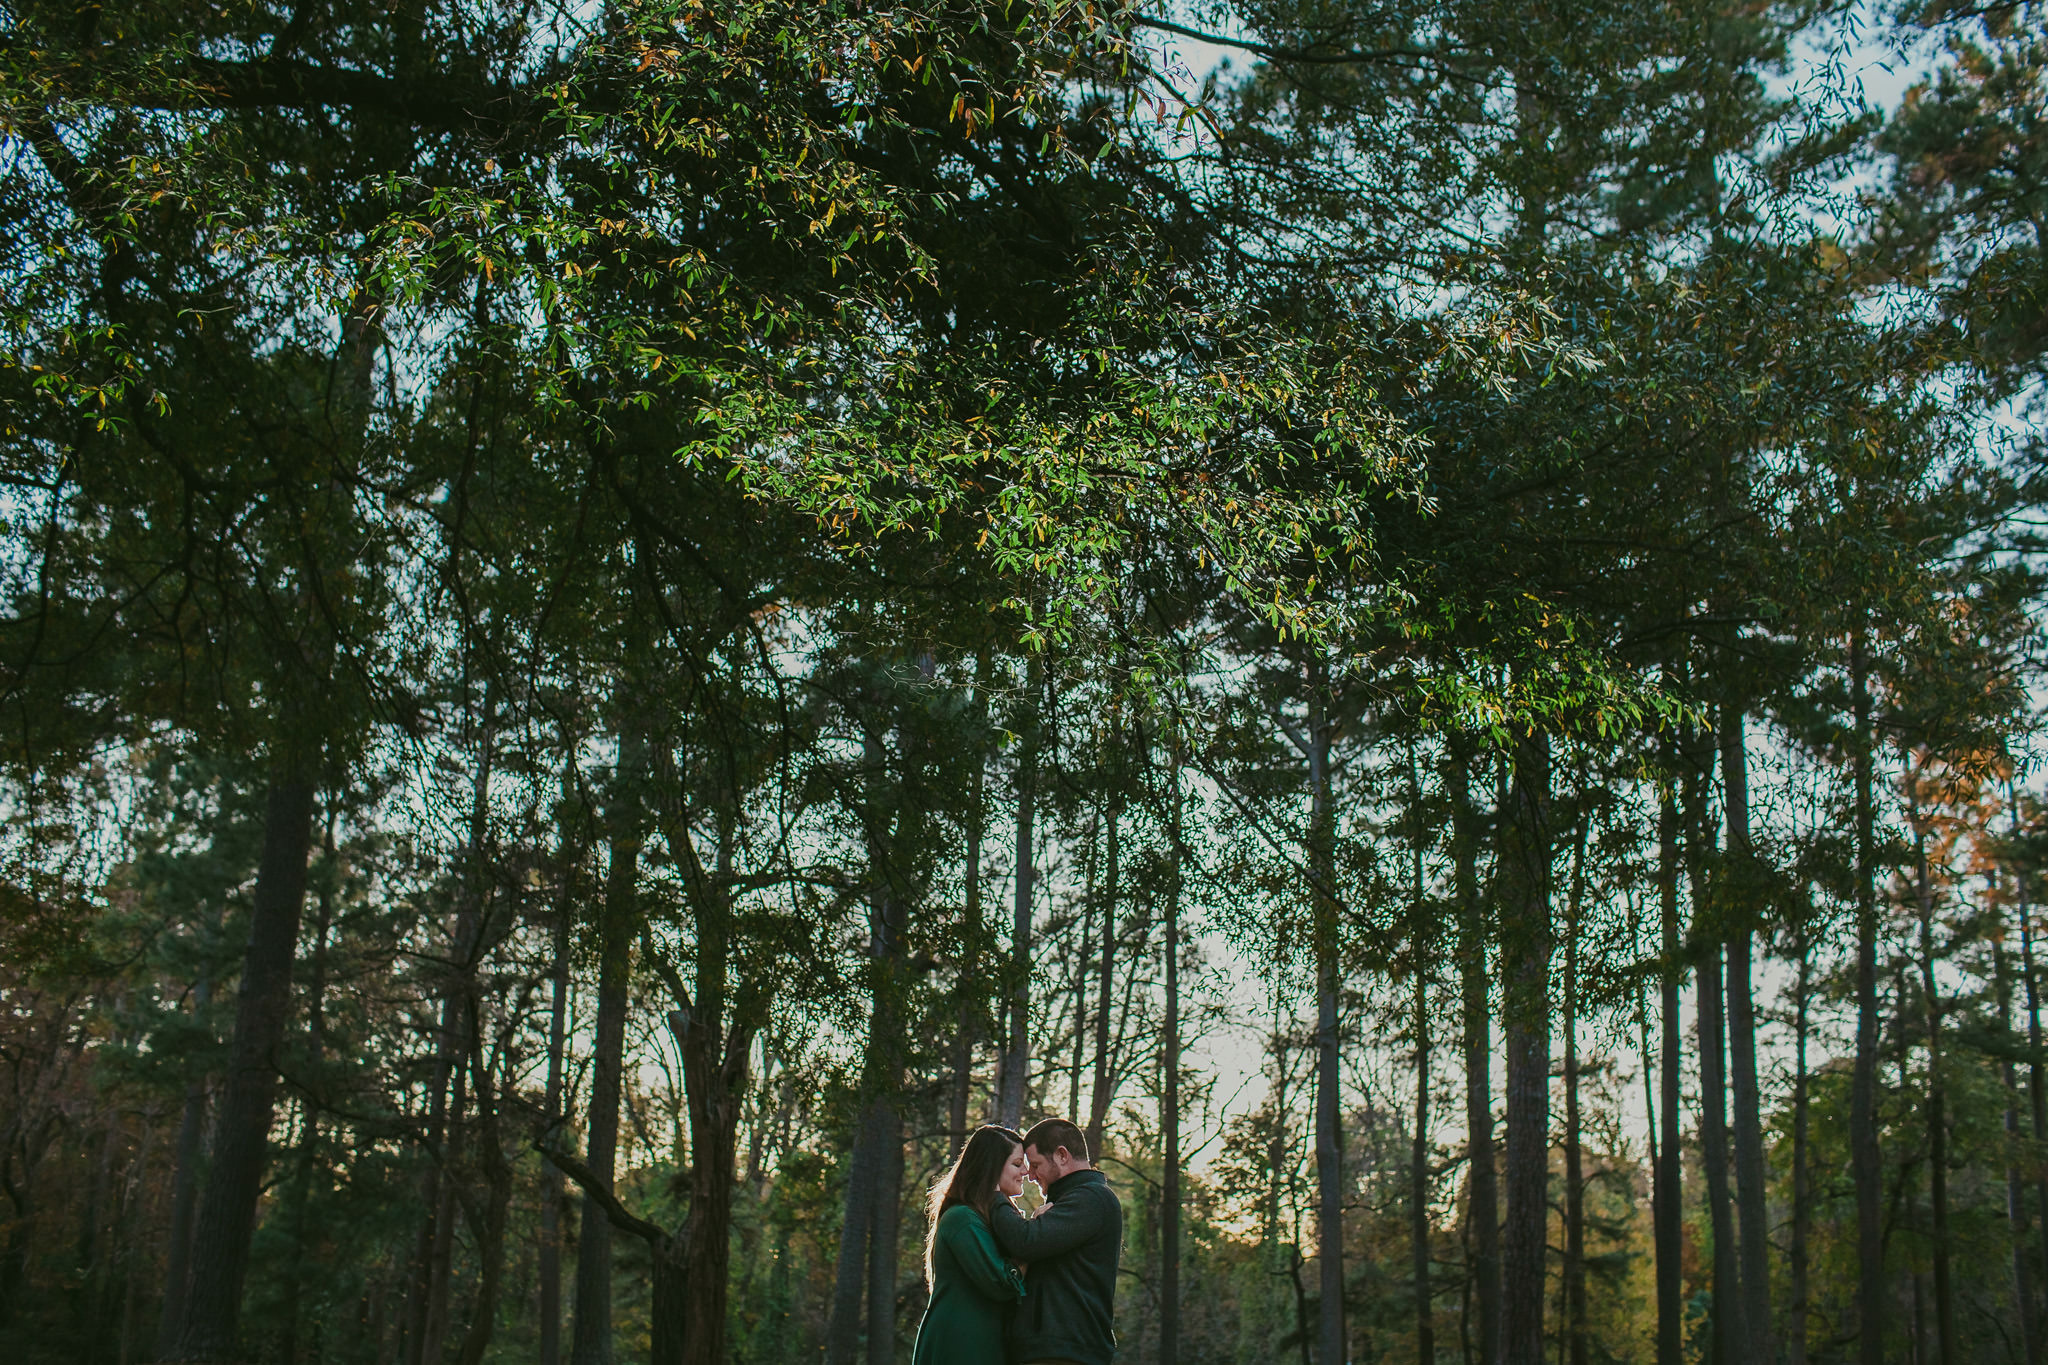 Epic pines make the perfect backdrop for this Satatesville, NC engagement session at Mac Anderson Park